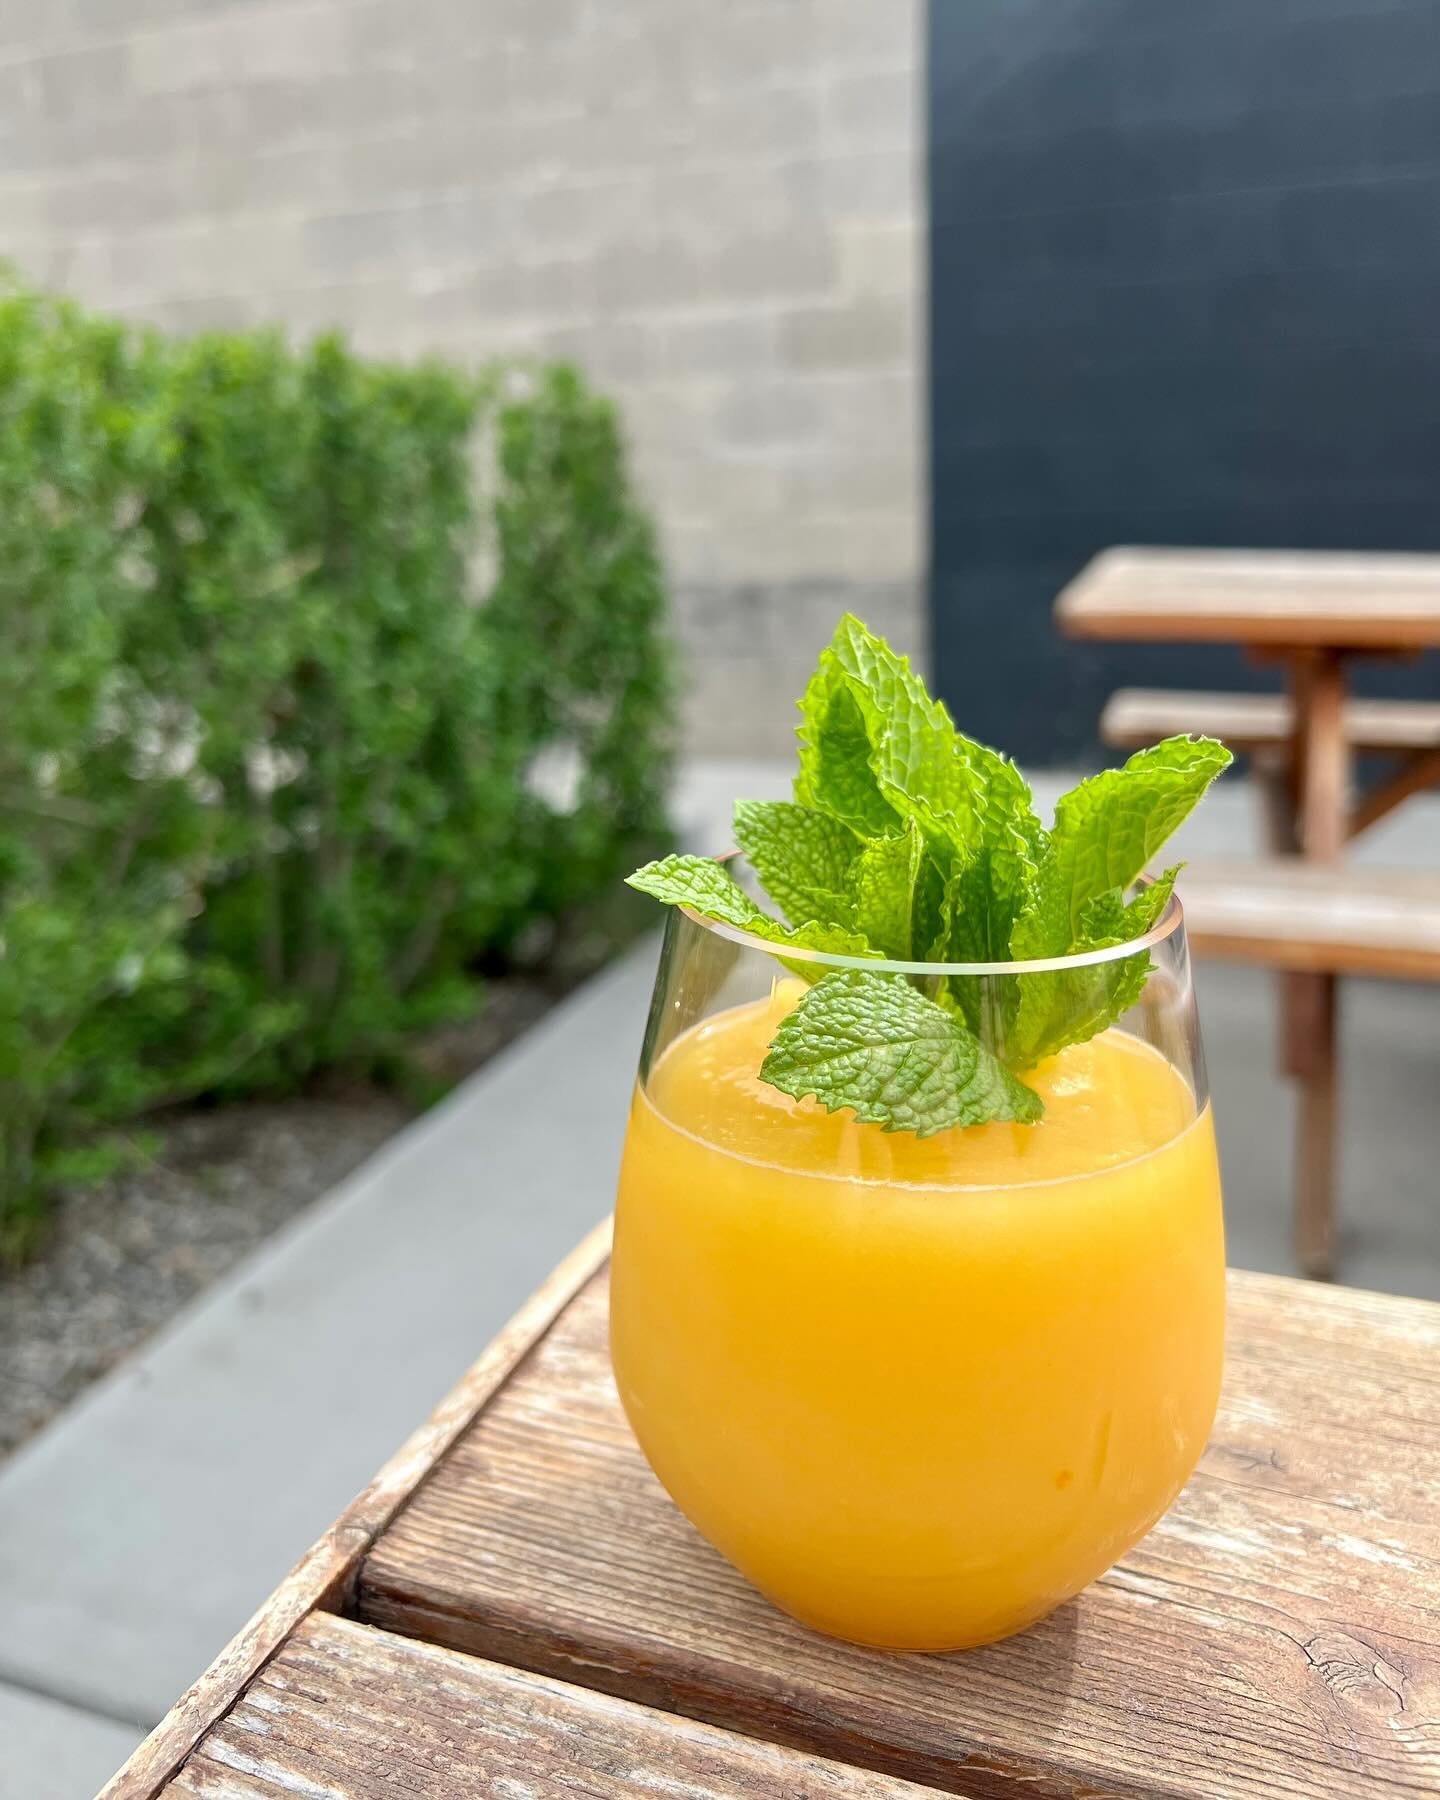 We have a new fantastic frozen flavor for you freaks! It&rsquo;s the Peach Smash! Espolon Blanco, Peach, Tangerine, Mint, Lemon and all for the great price of $12! Come try one this weekend before they run out!  #denverdrinks #denverhappyhour #denver